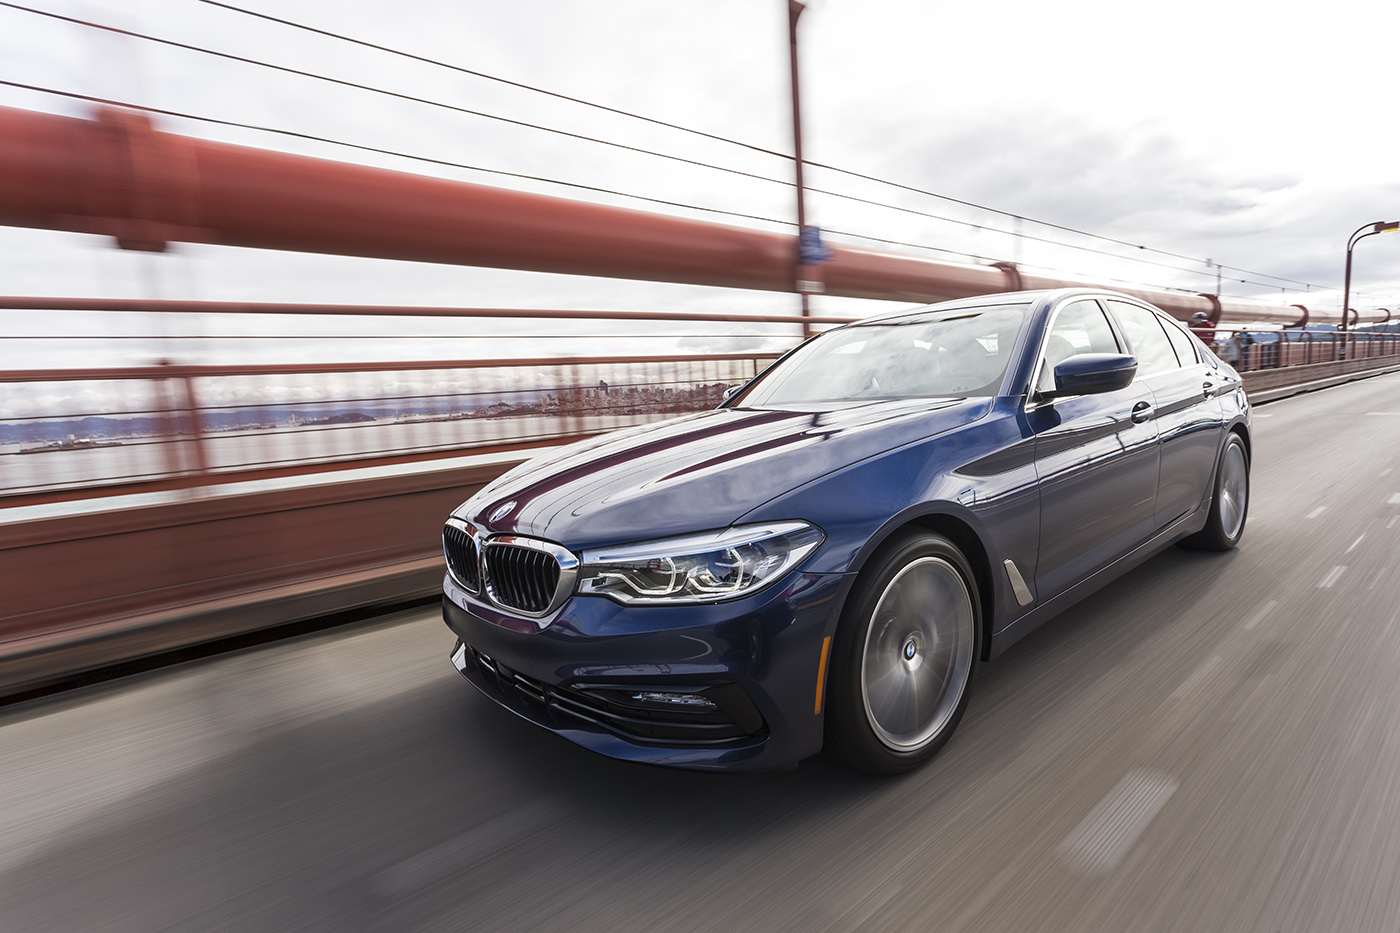 Driven: From The Future to Napa in the 2017 BMW 540i